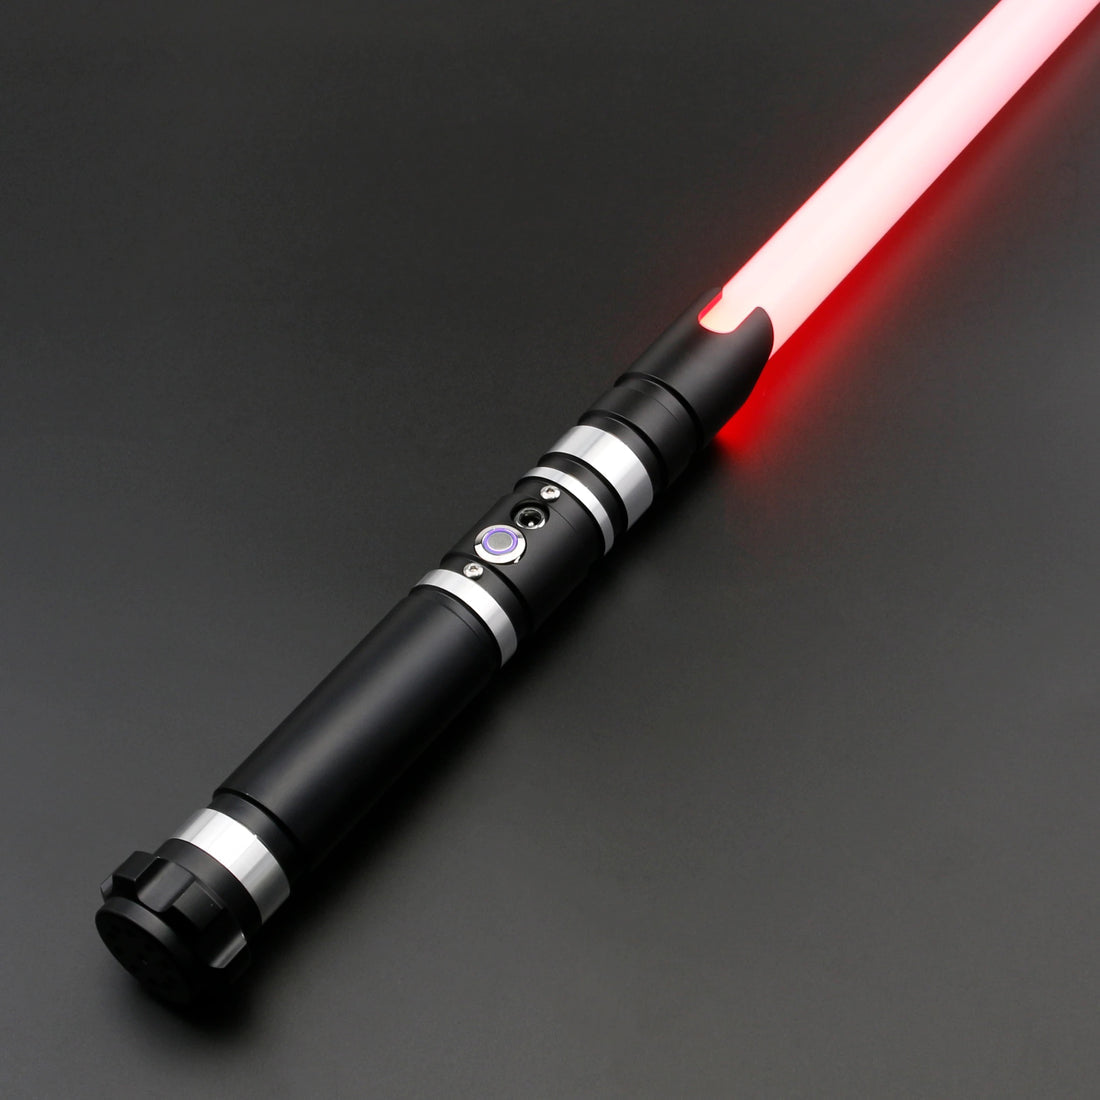 THE SITH FANG LIGHTSABER